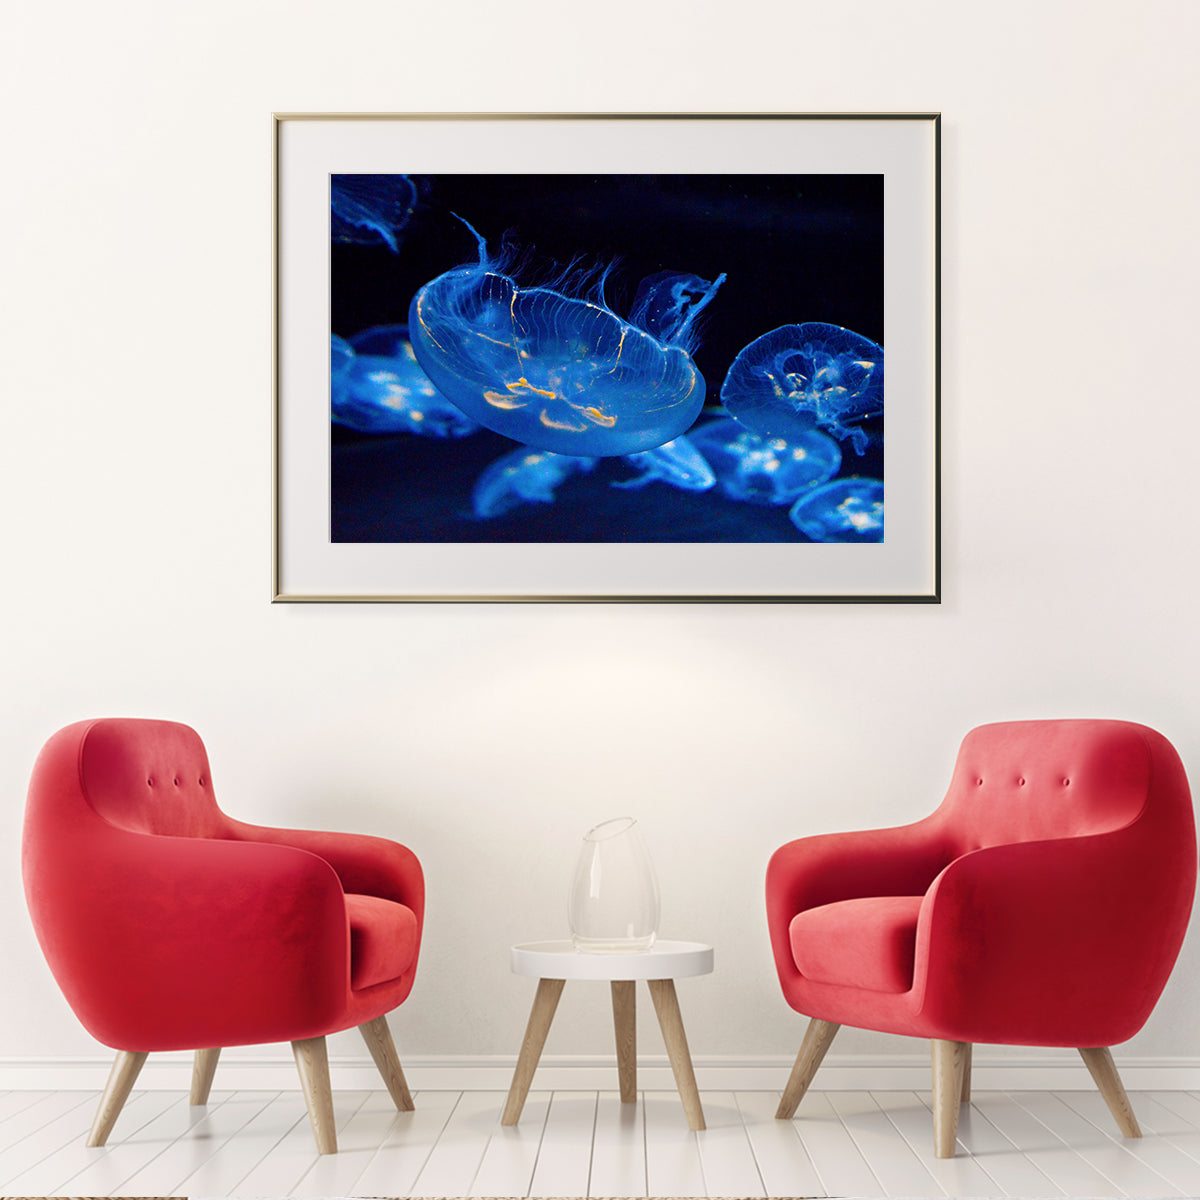 Jellyfish in Dark Water Living Rooms Posters Wall Art Prints-Horizontal Posters NOT FRAMED-CetArt-10″x8″ inches-CetArt